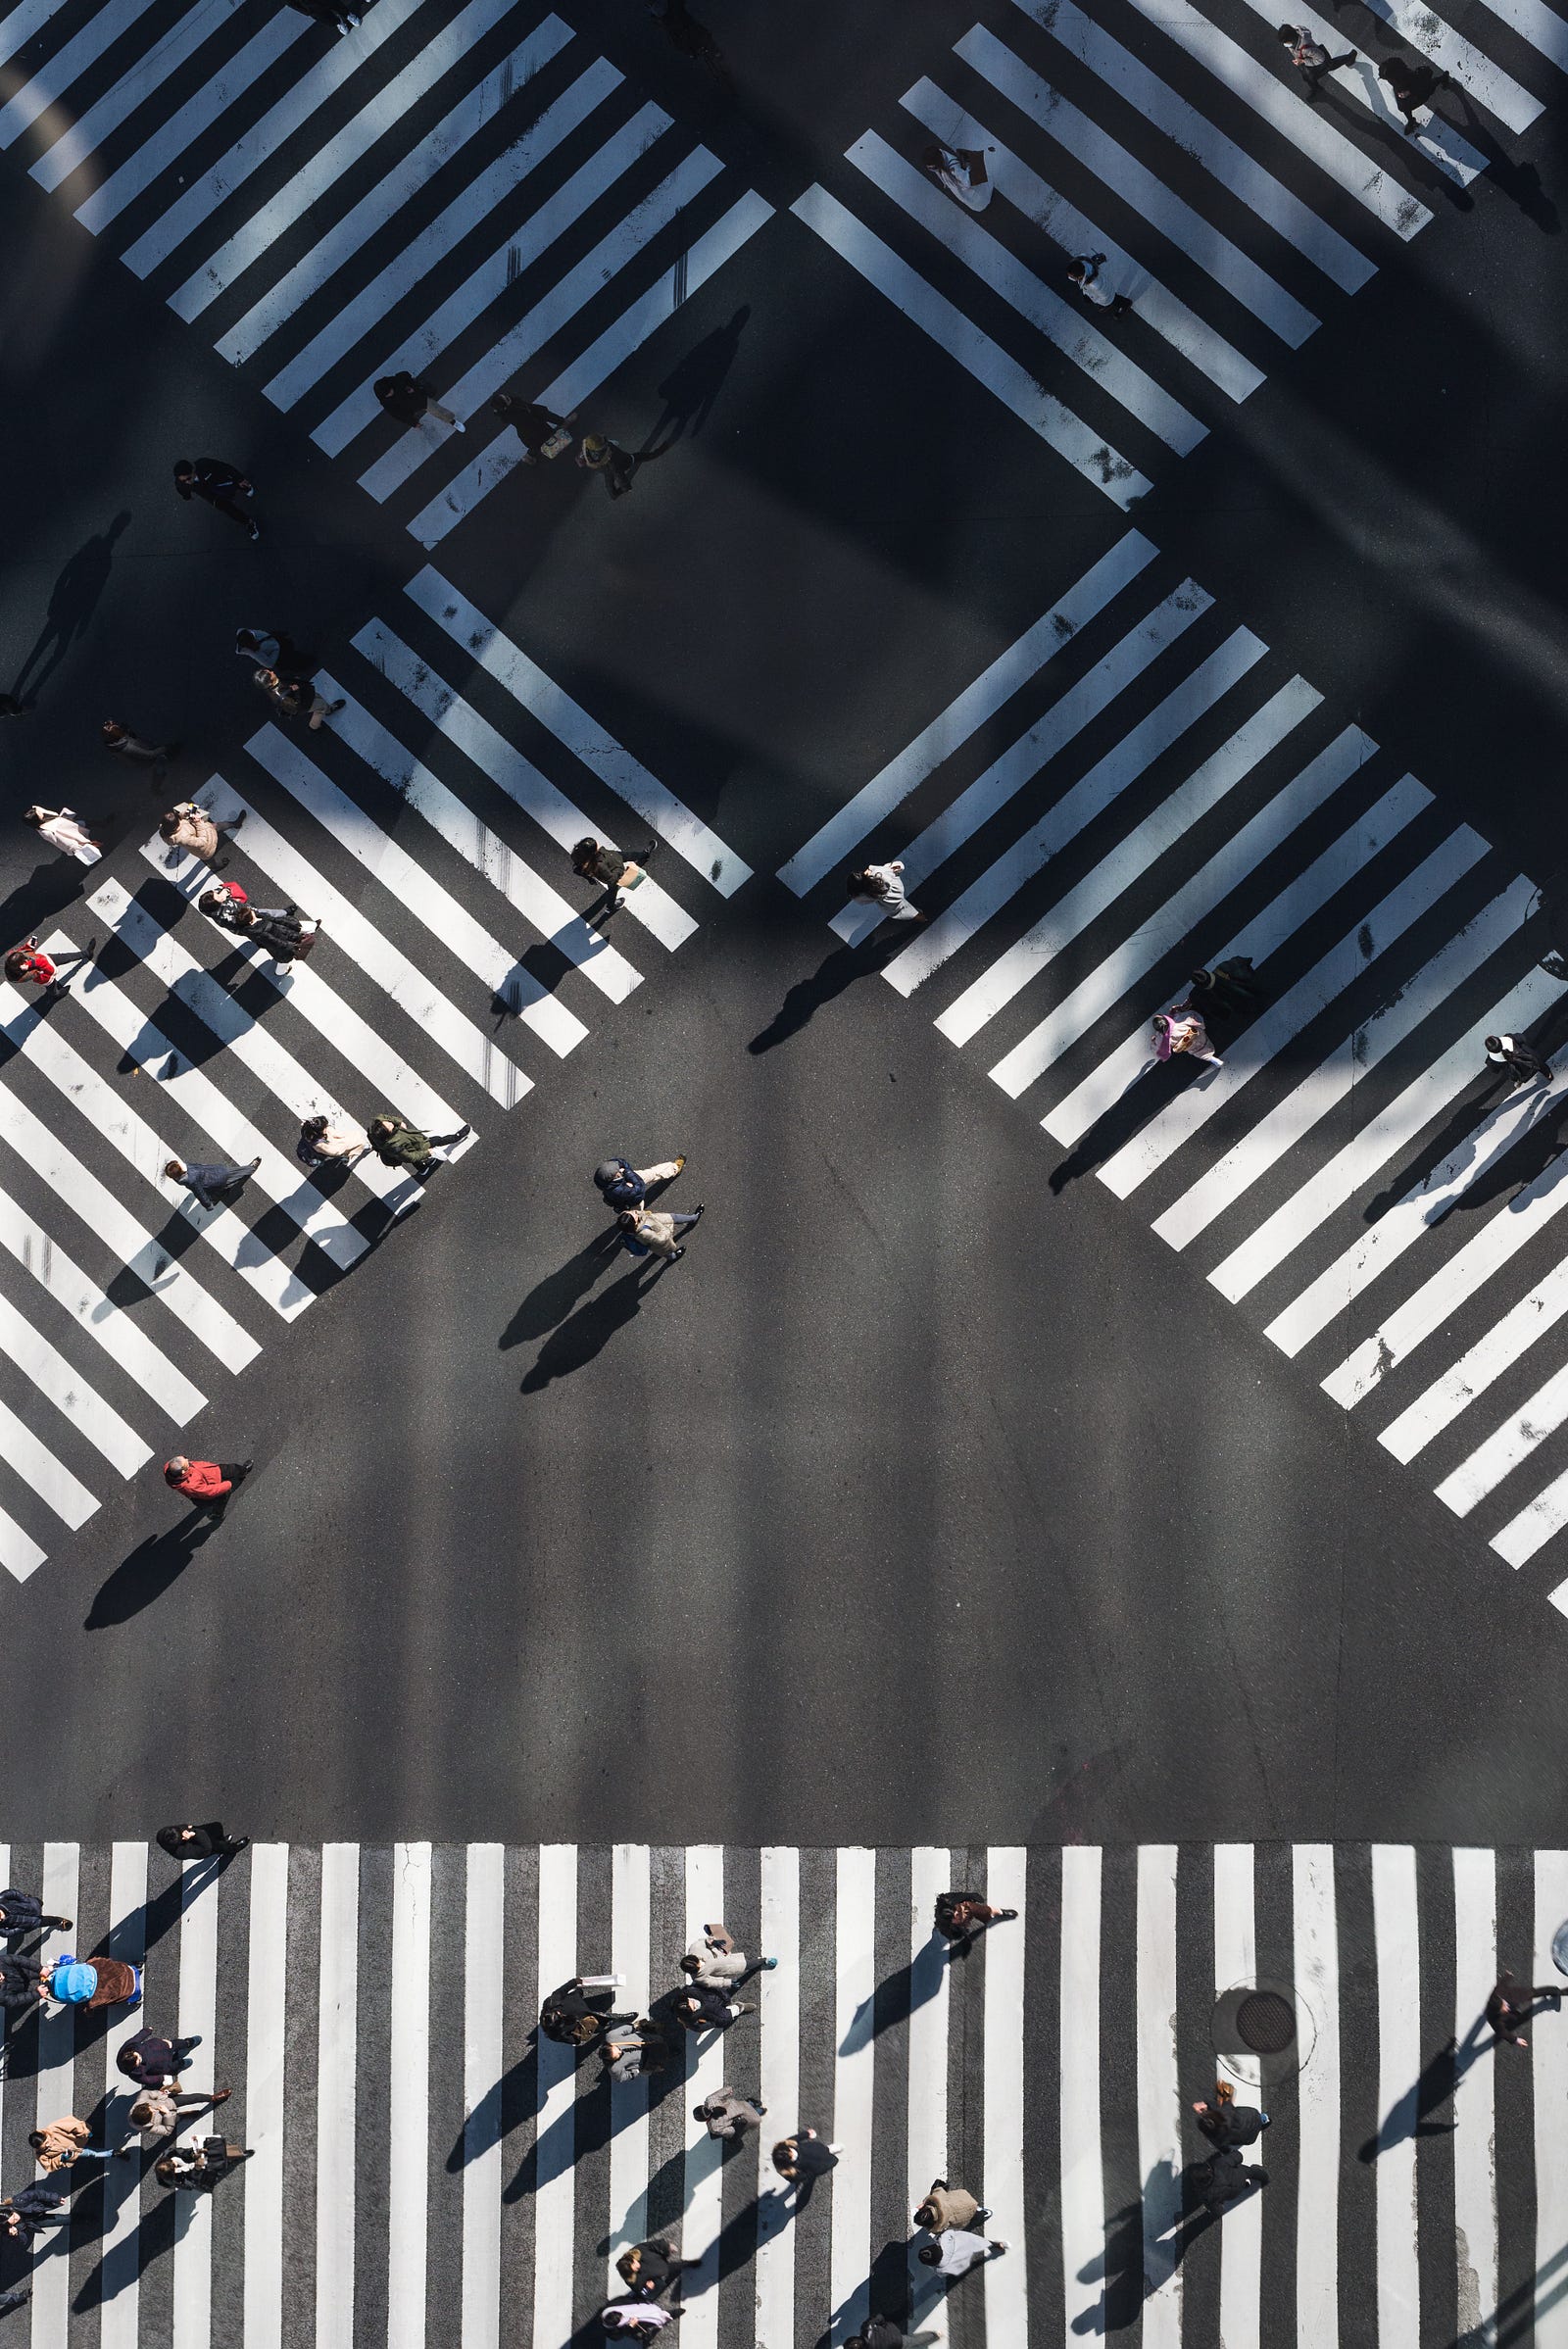 The scramble crosswalk in Shibuya, Tokyo, as visualized from above. This essay explores the connection between walking and diabetes prevention, emphasizing the importance of incorporating this accessible exercise into daily routines.